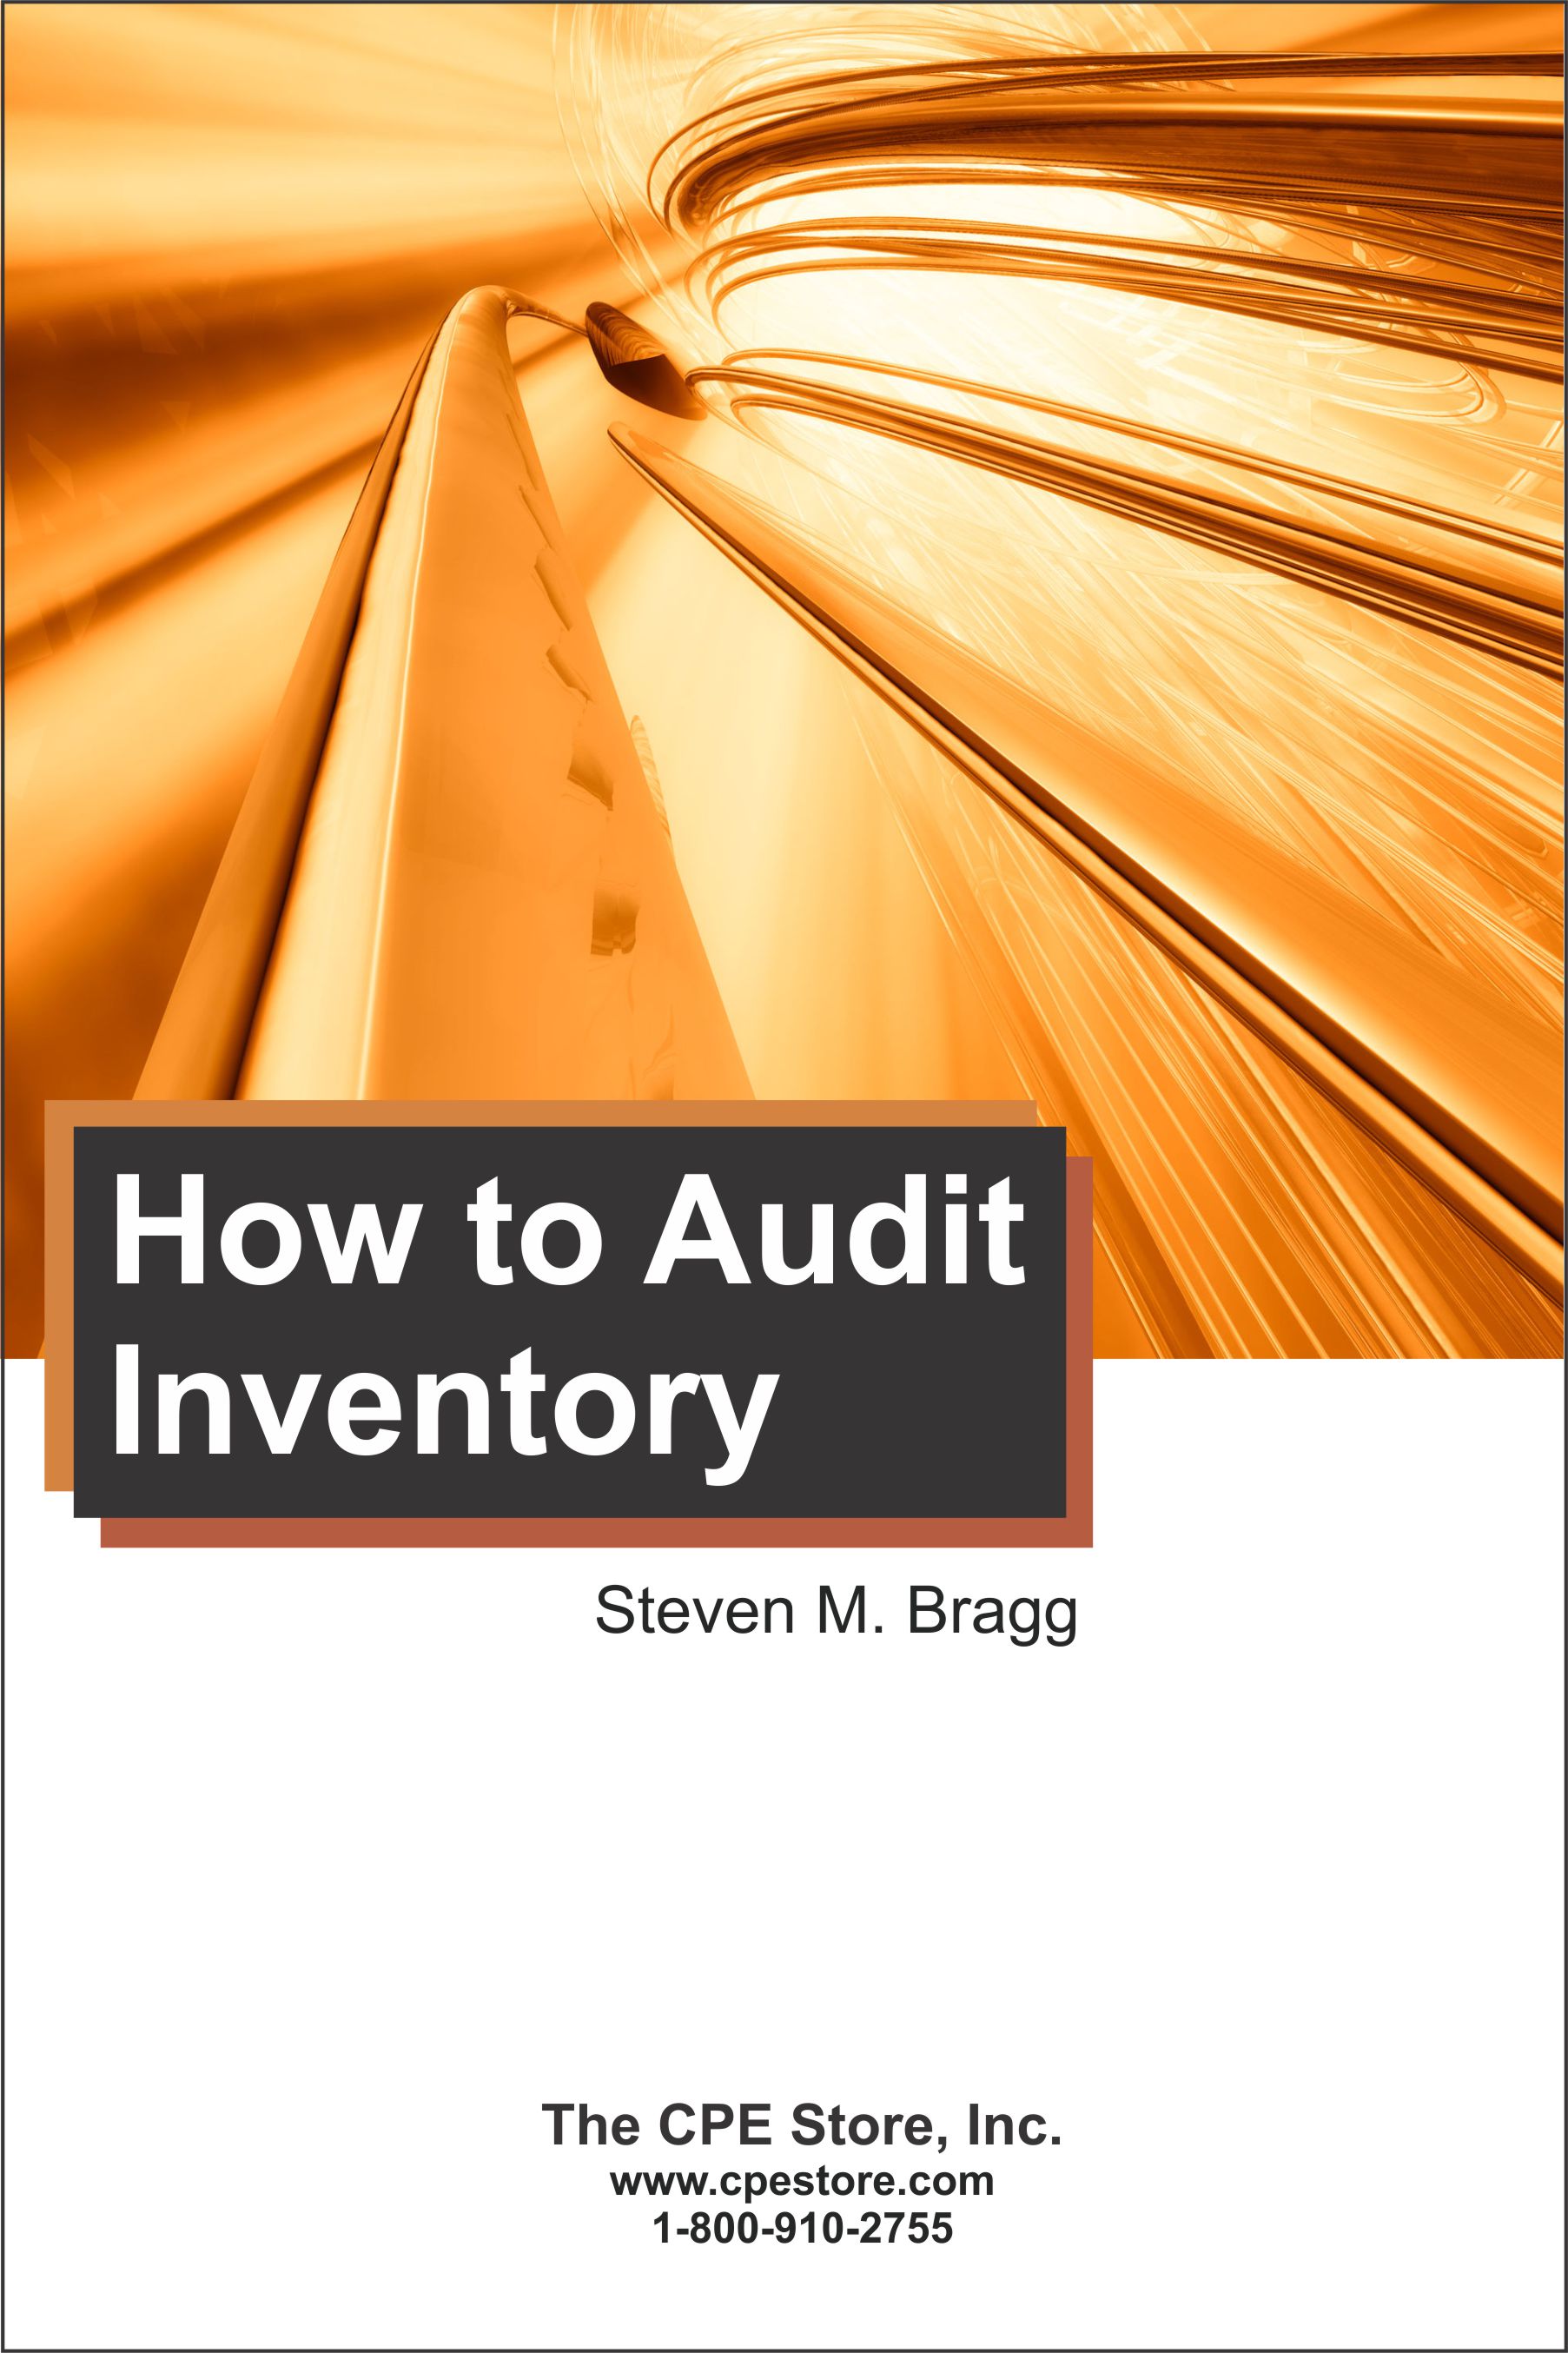 How to Audit Inventory